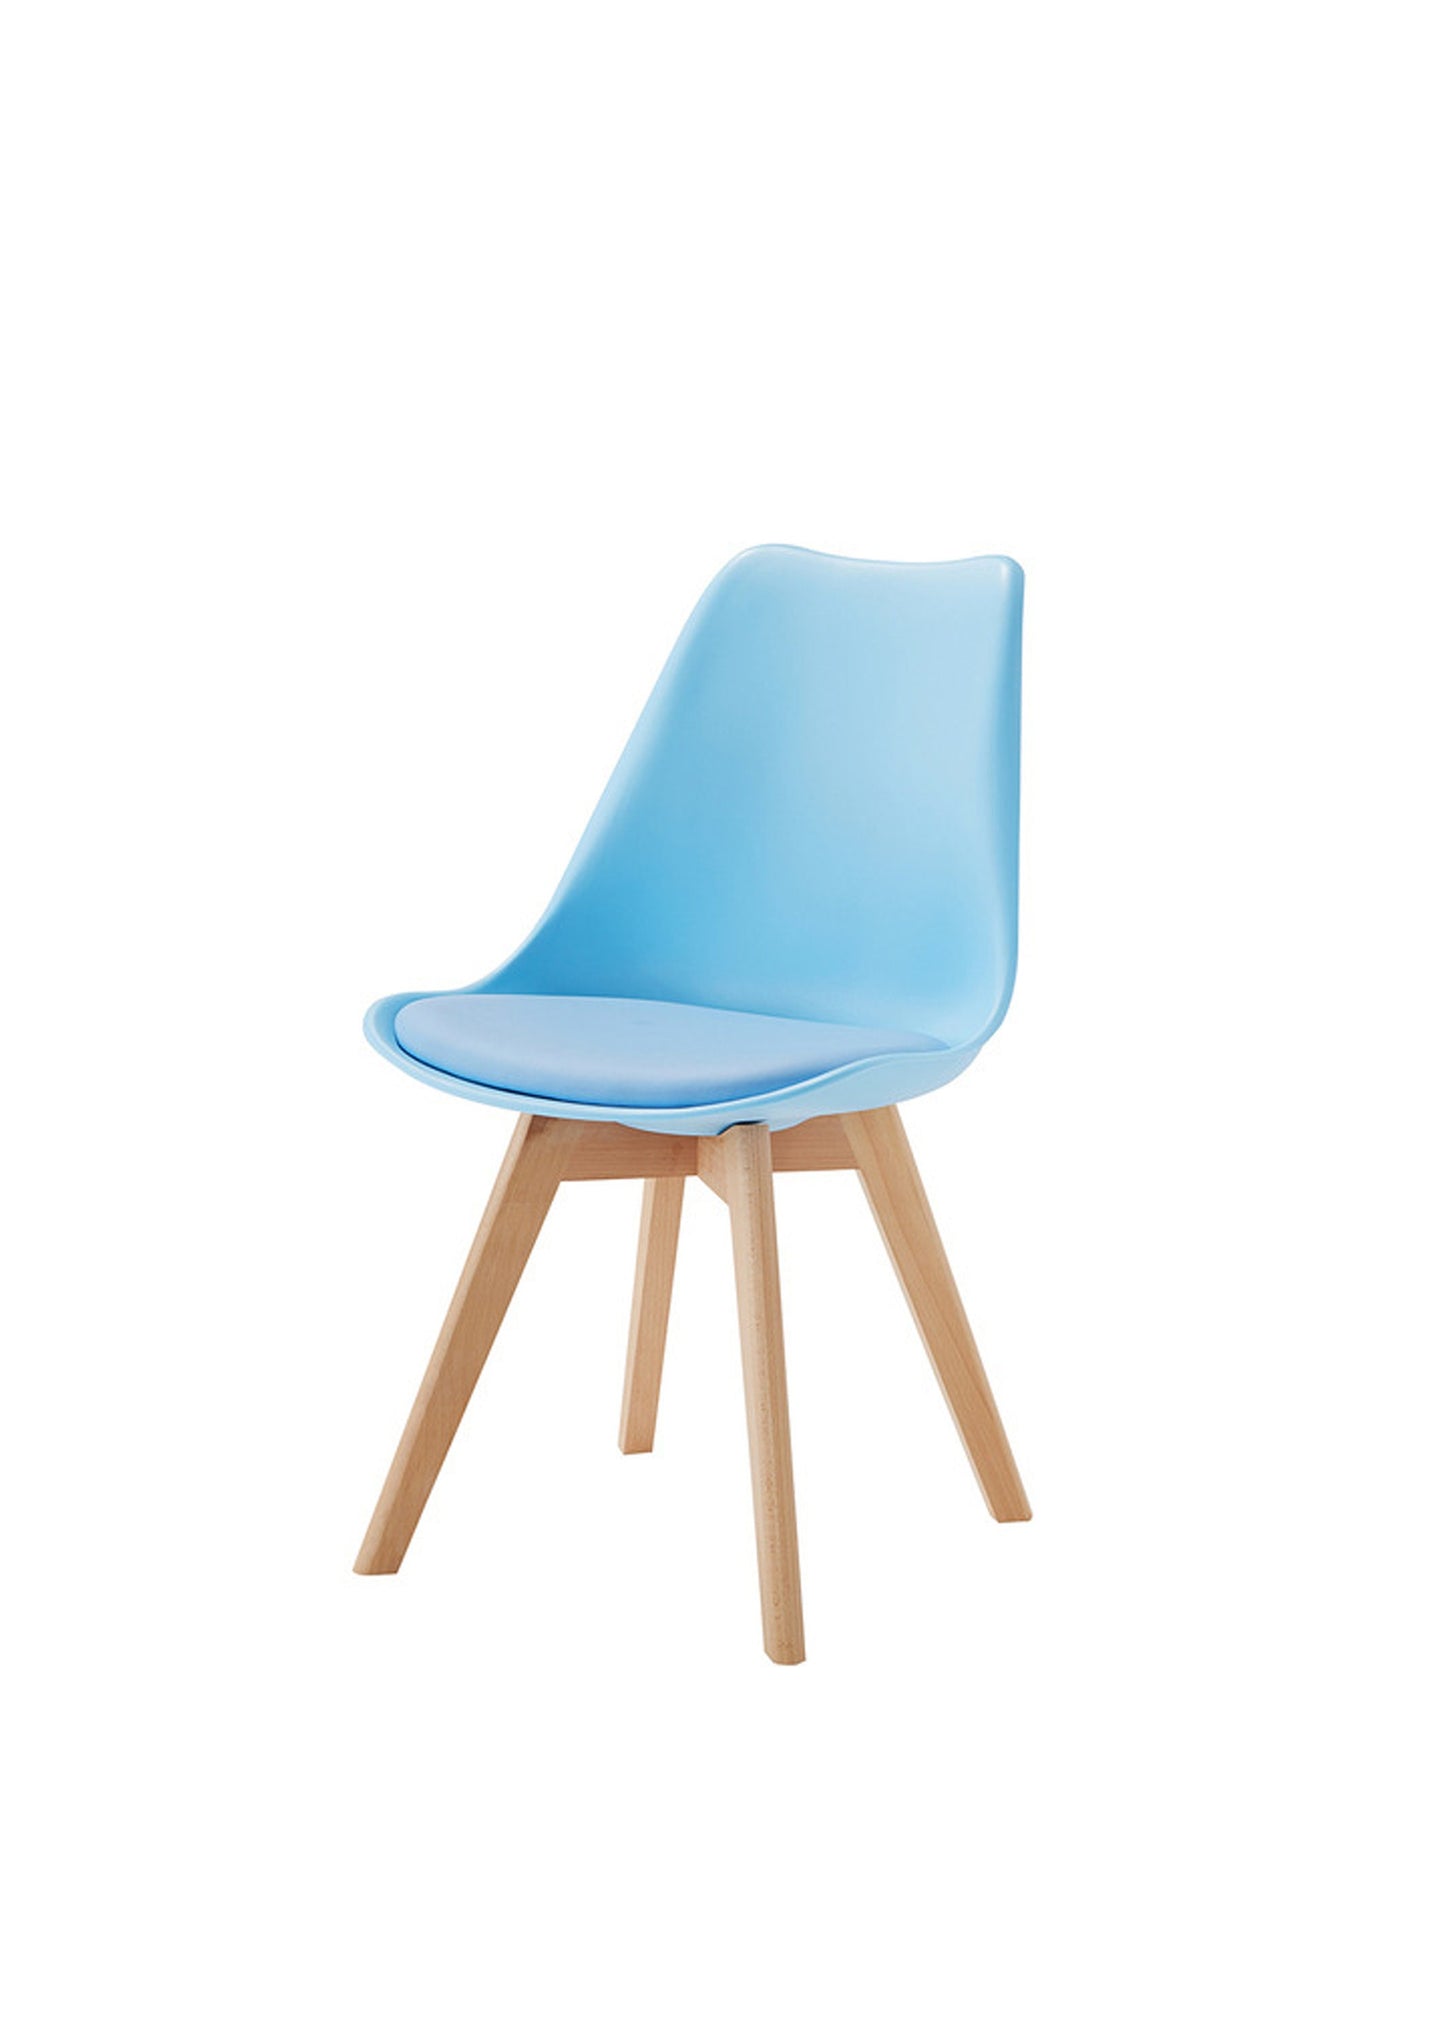 Stylish padded seat PAIR of dining chairs available in Pink, Blue, Aqua and Putty